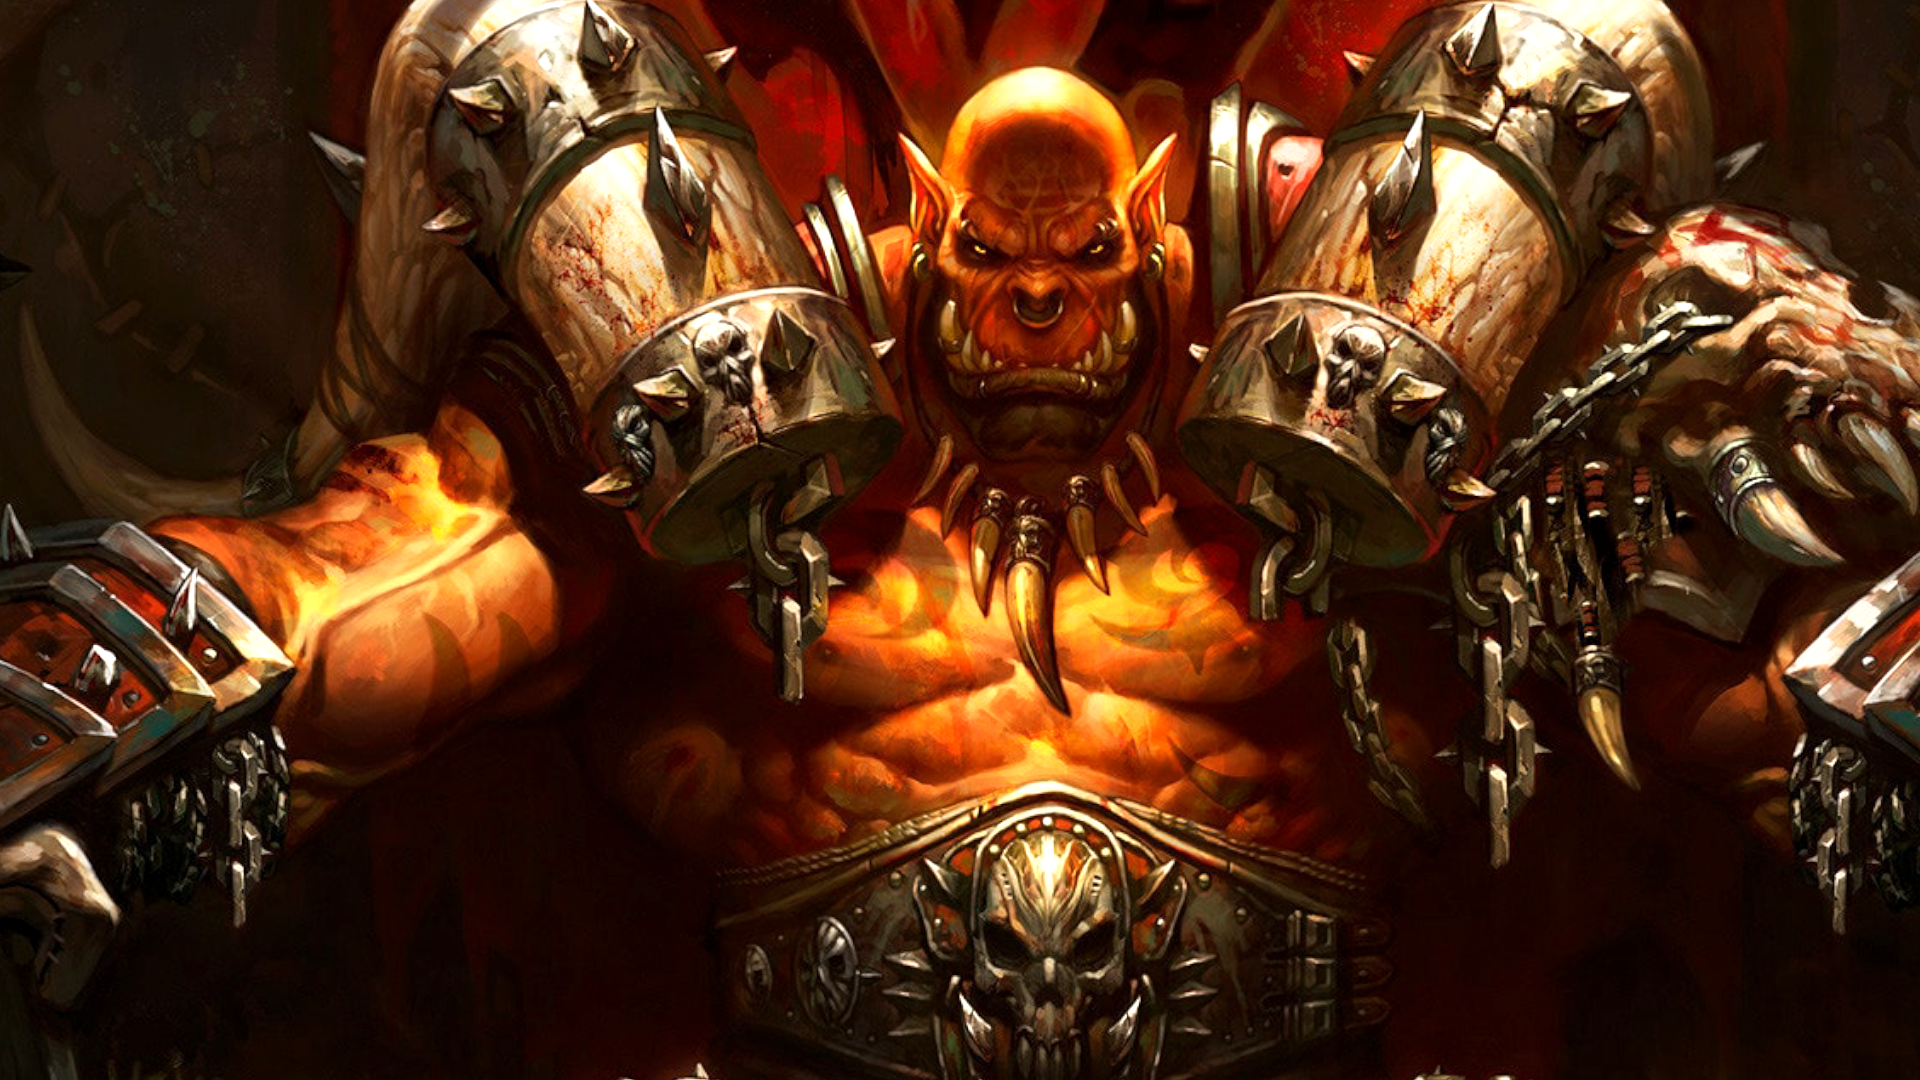 World of Warcraft boss says Microsoft is happy to 'let Blizzard be Blizzard,' but I'm not sure that's entirely true